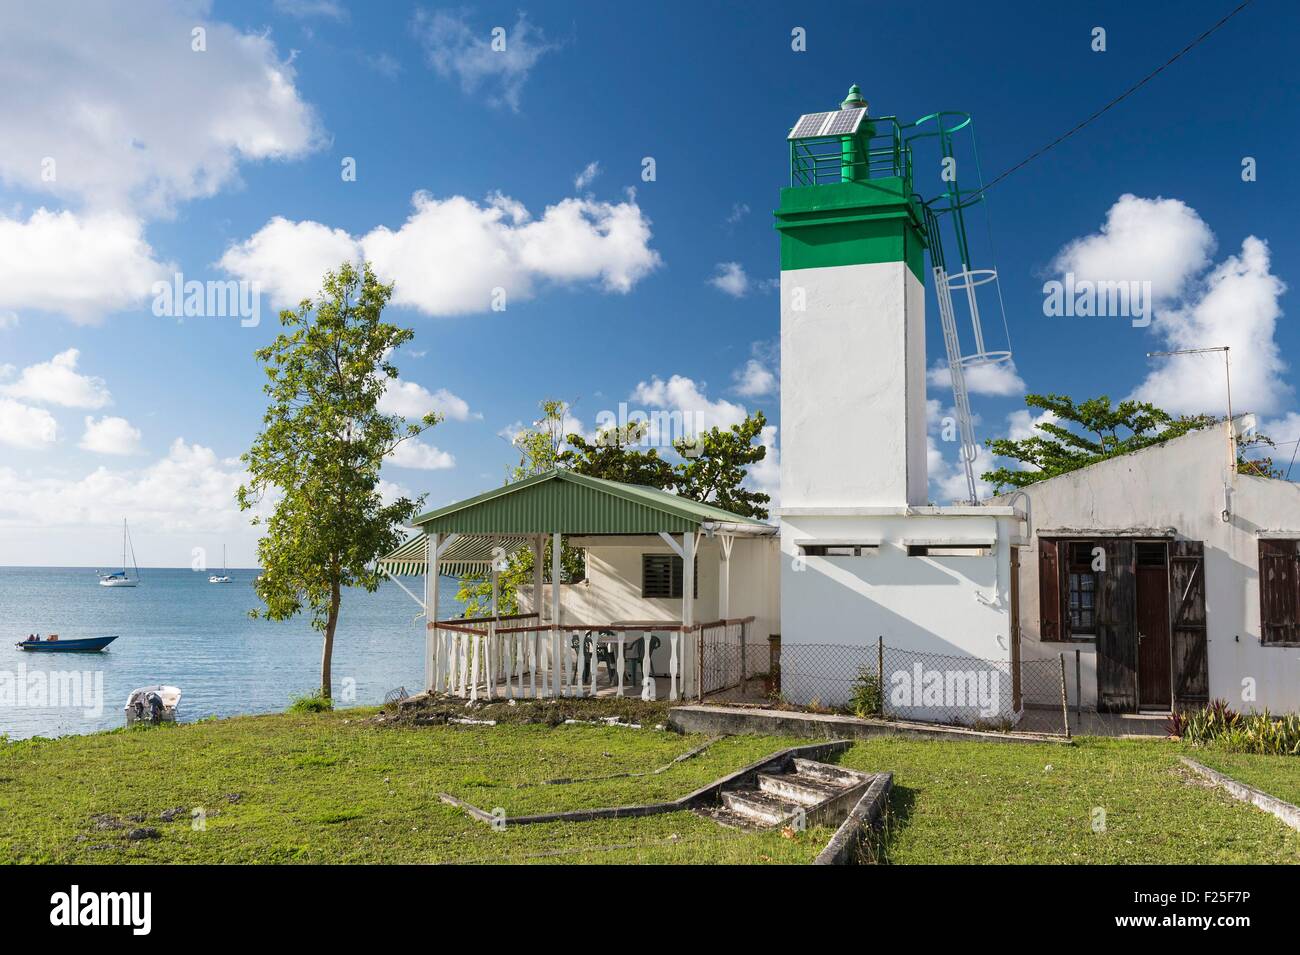 France, Guadeloupe (French West Indies), Marie Galante, Saint Louis, the lighthouse in the port Stock Photo